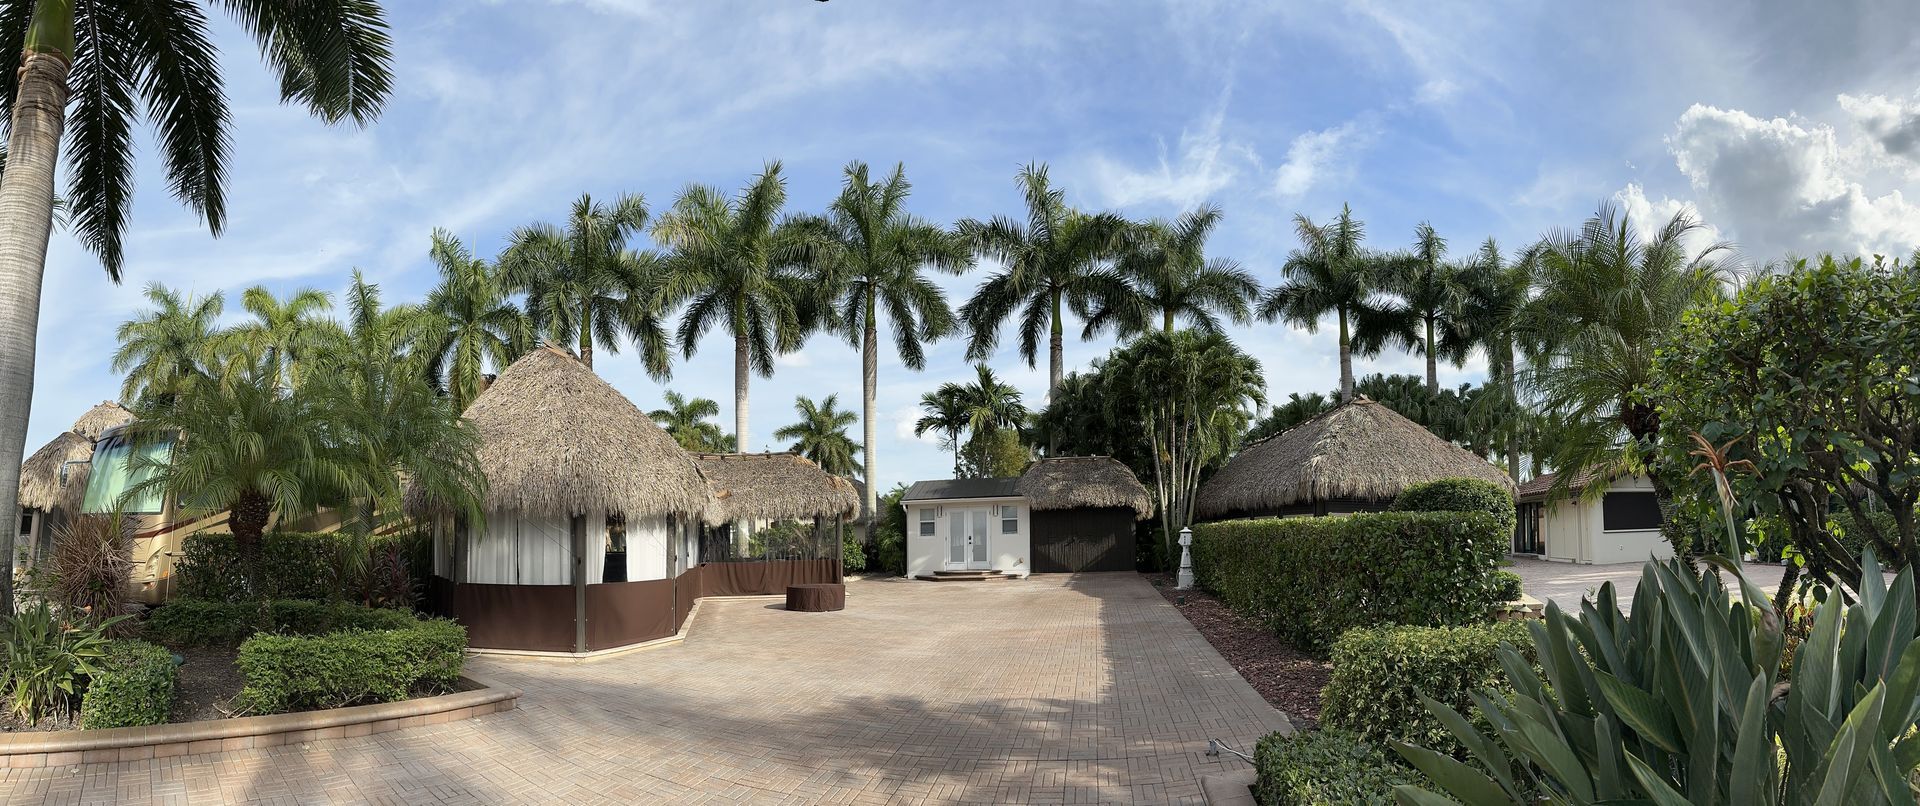 A panoramic view of a house with thatched roofs surrounded by palm trees.